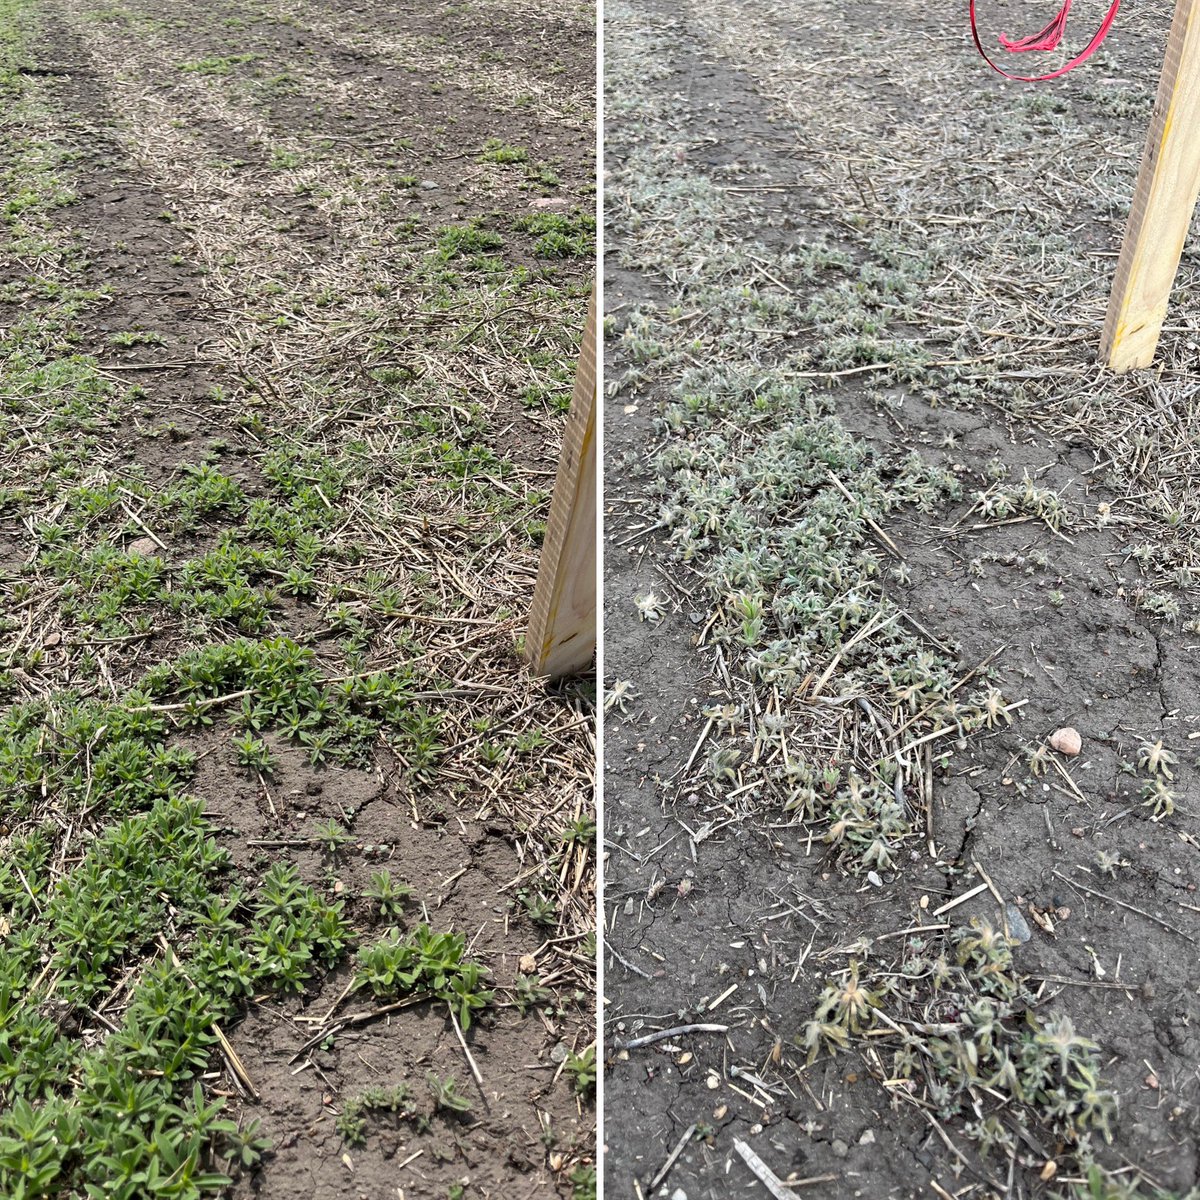 Reece Bateman is seeing a difference 48hr after application with Insight on this Kochia patch. Check out the before & after! #InsightFastestBurndown @TeamSASKGOWAN You are now entered in the cooler contest. Thanks for the photos